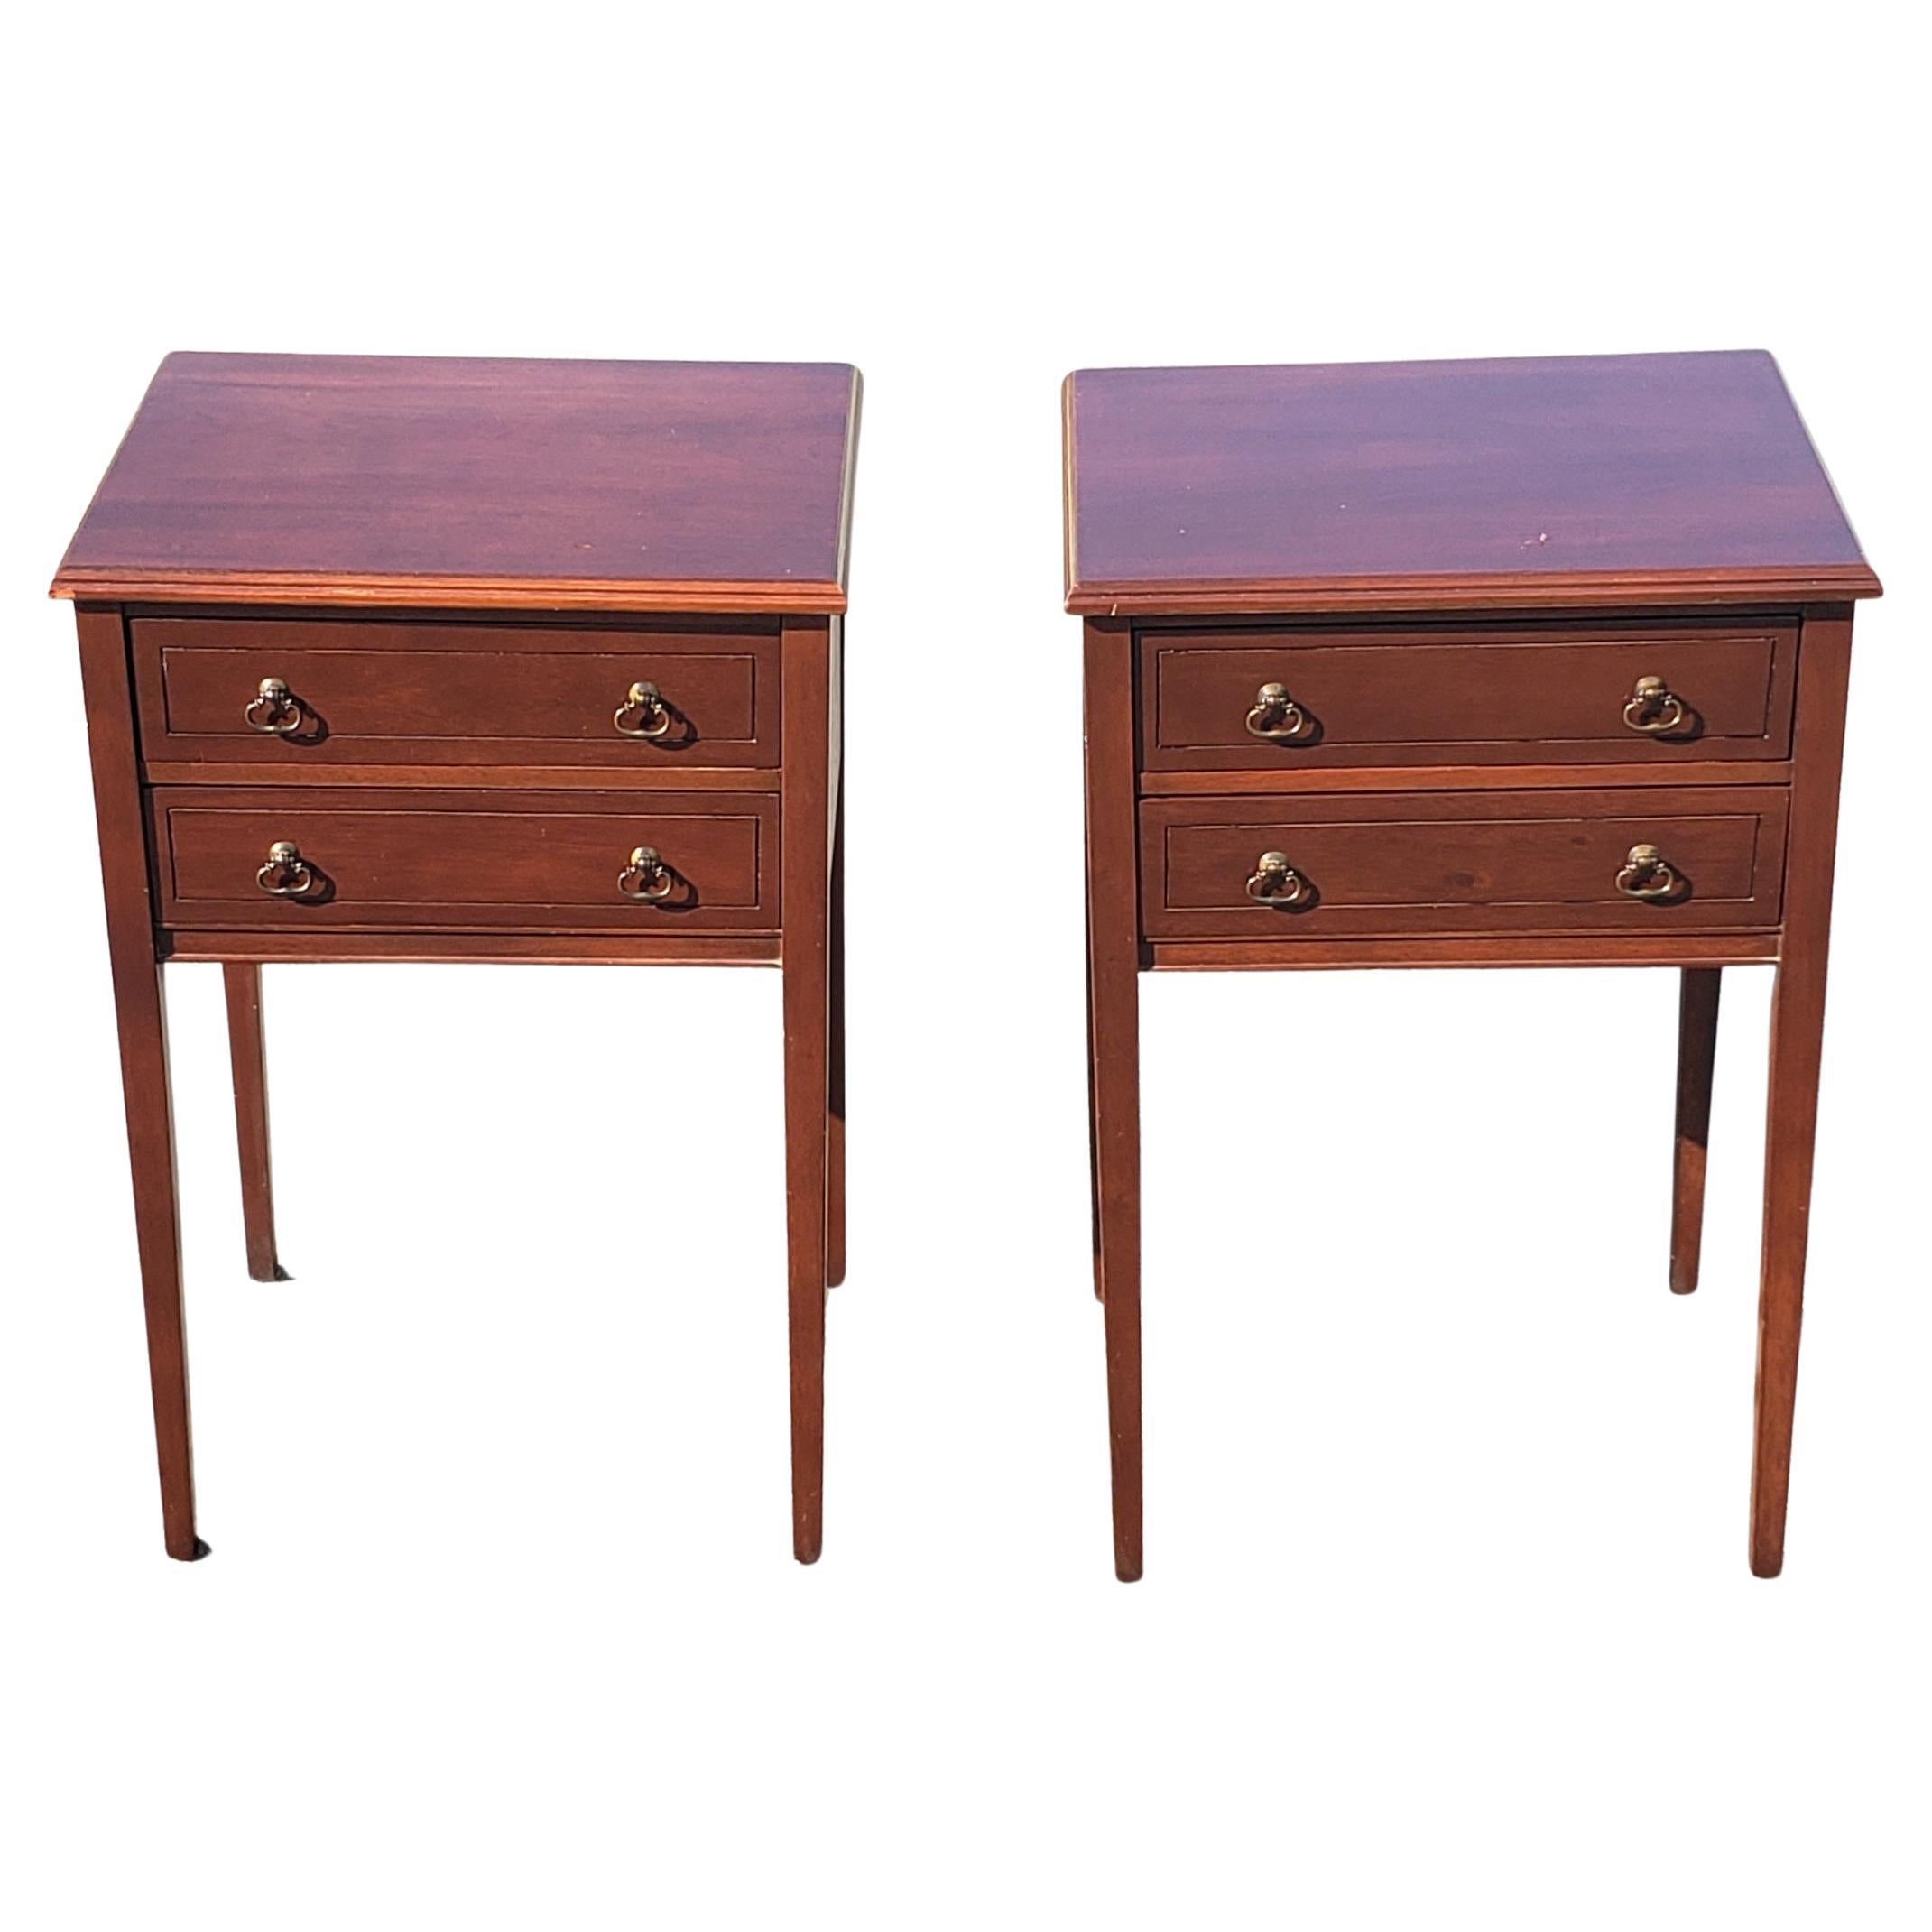 A pair of 1940s slender two-drawers Regency style mahogany side tables by Mersman Furniture.
Tables have been refinished recently and are in good vintage condition. Finished on all sides and measures 17